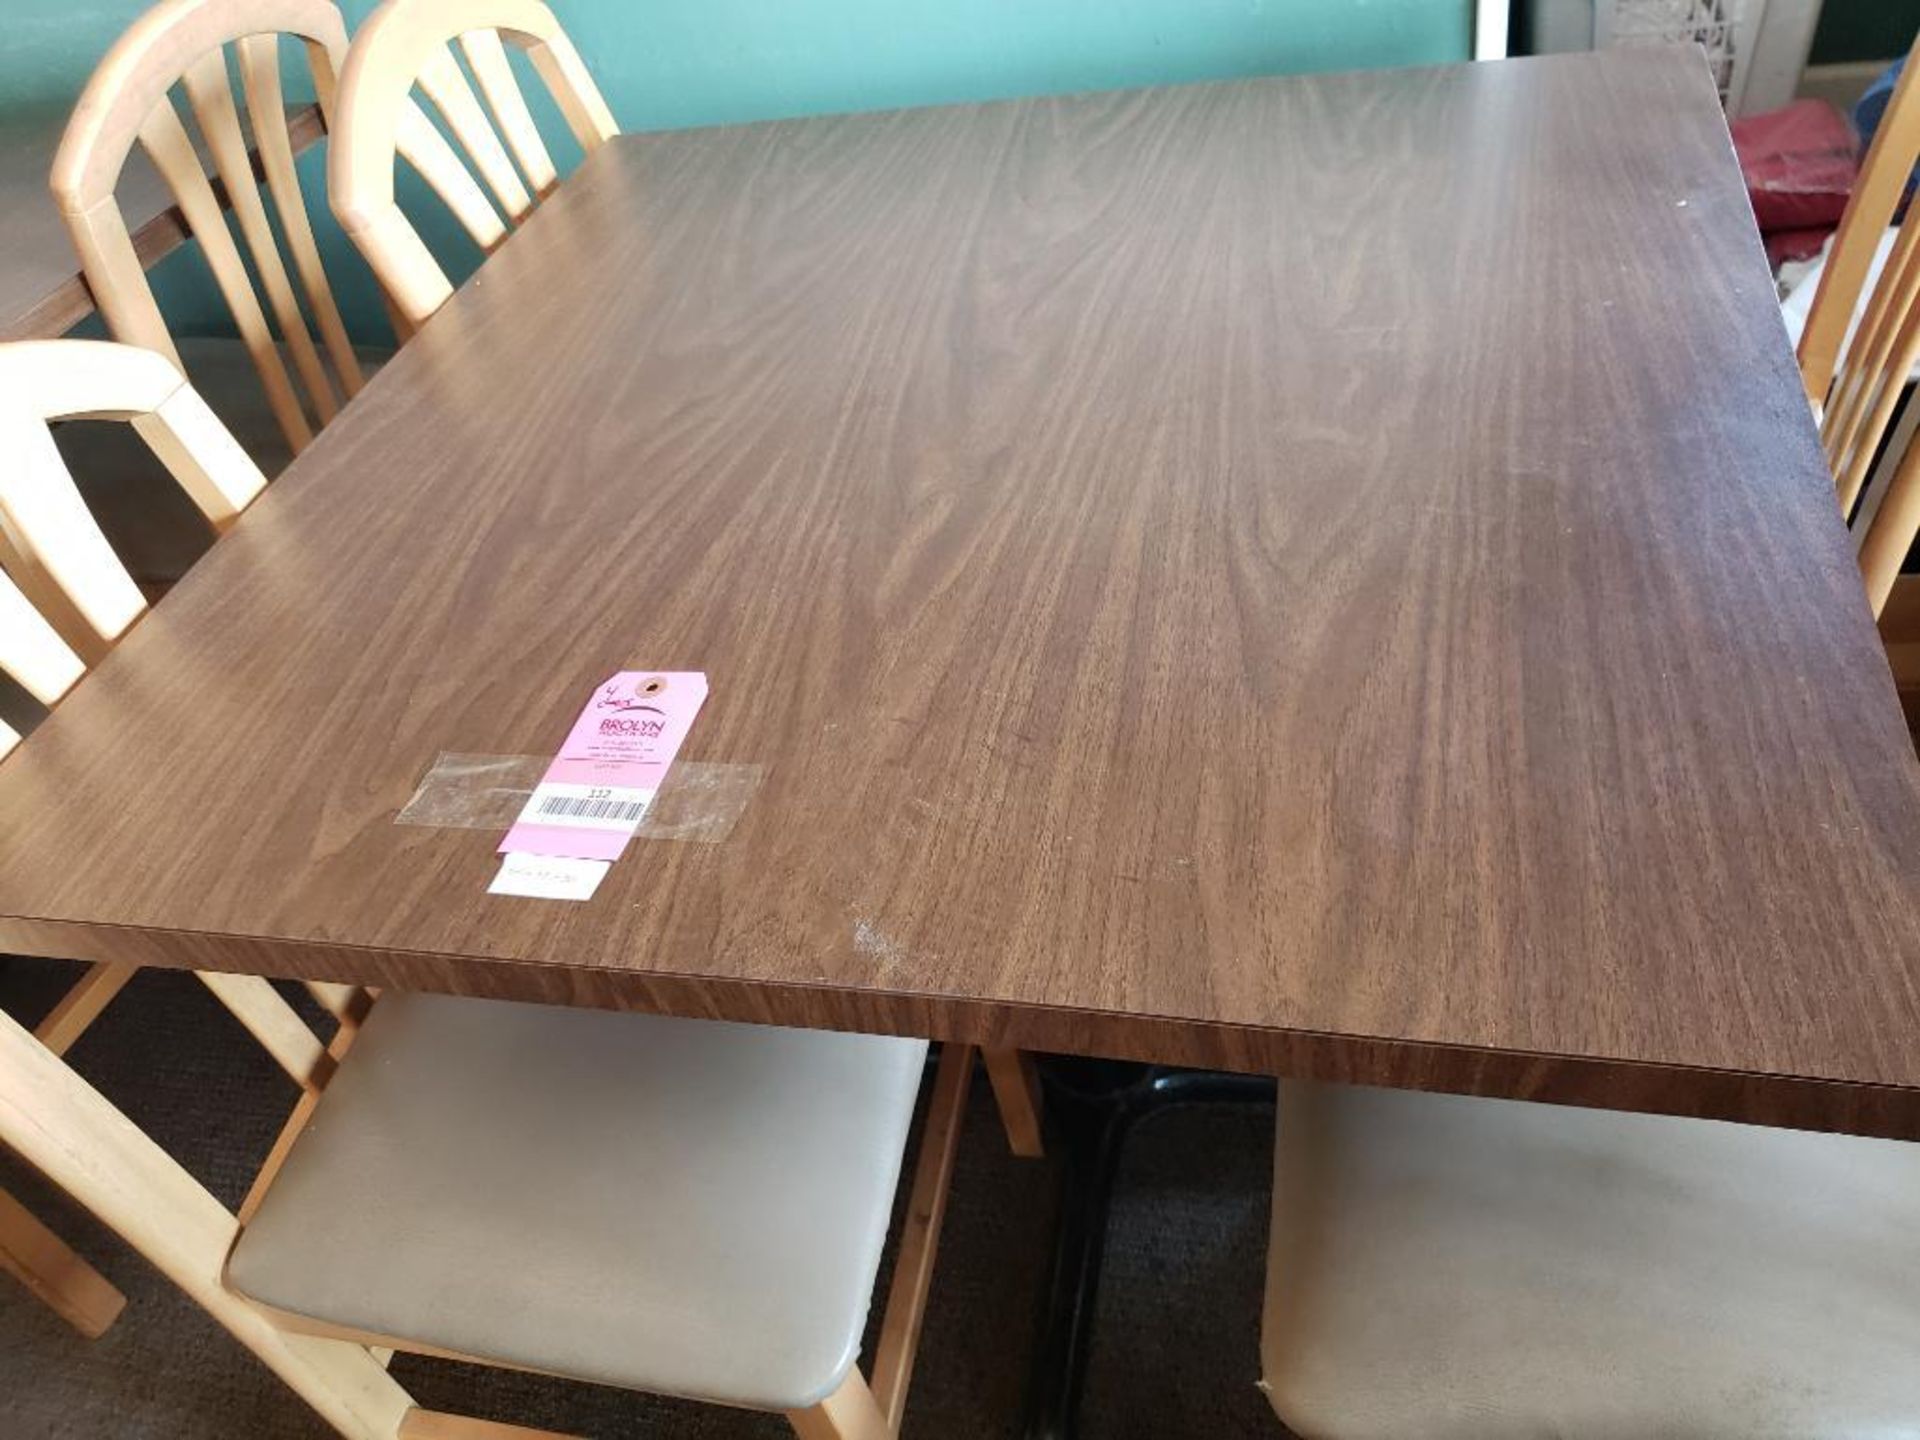 Table with 4 chairs. Table size 35in x 35in. - Image 4 of 5